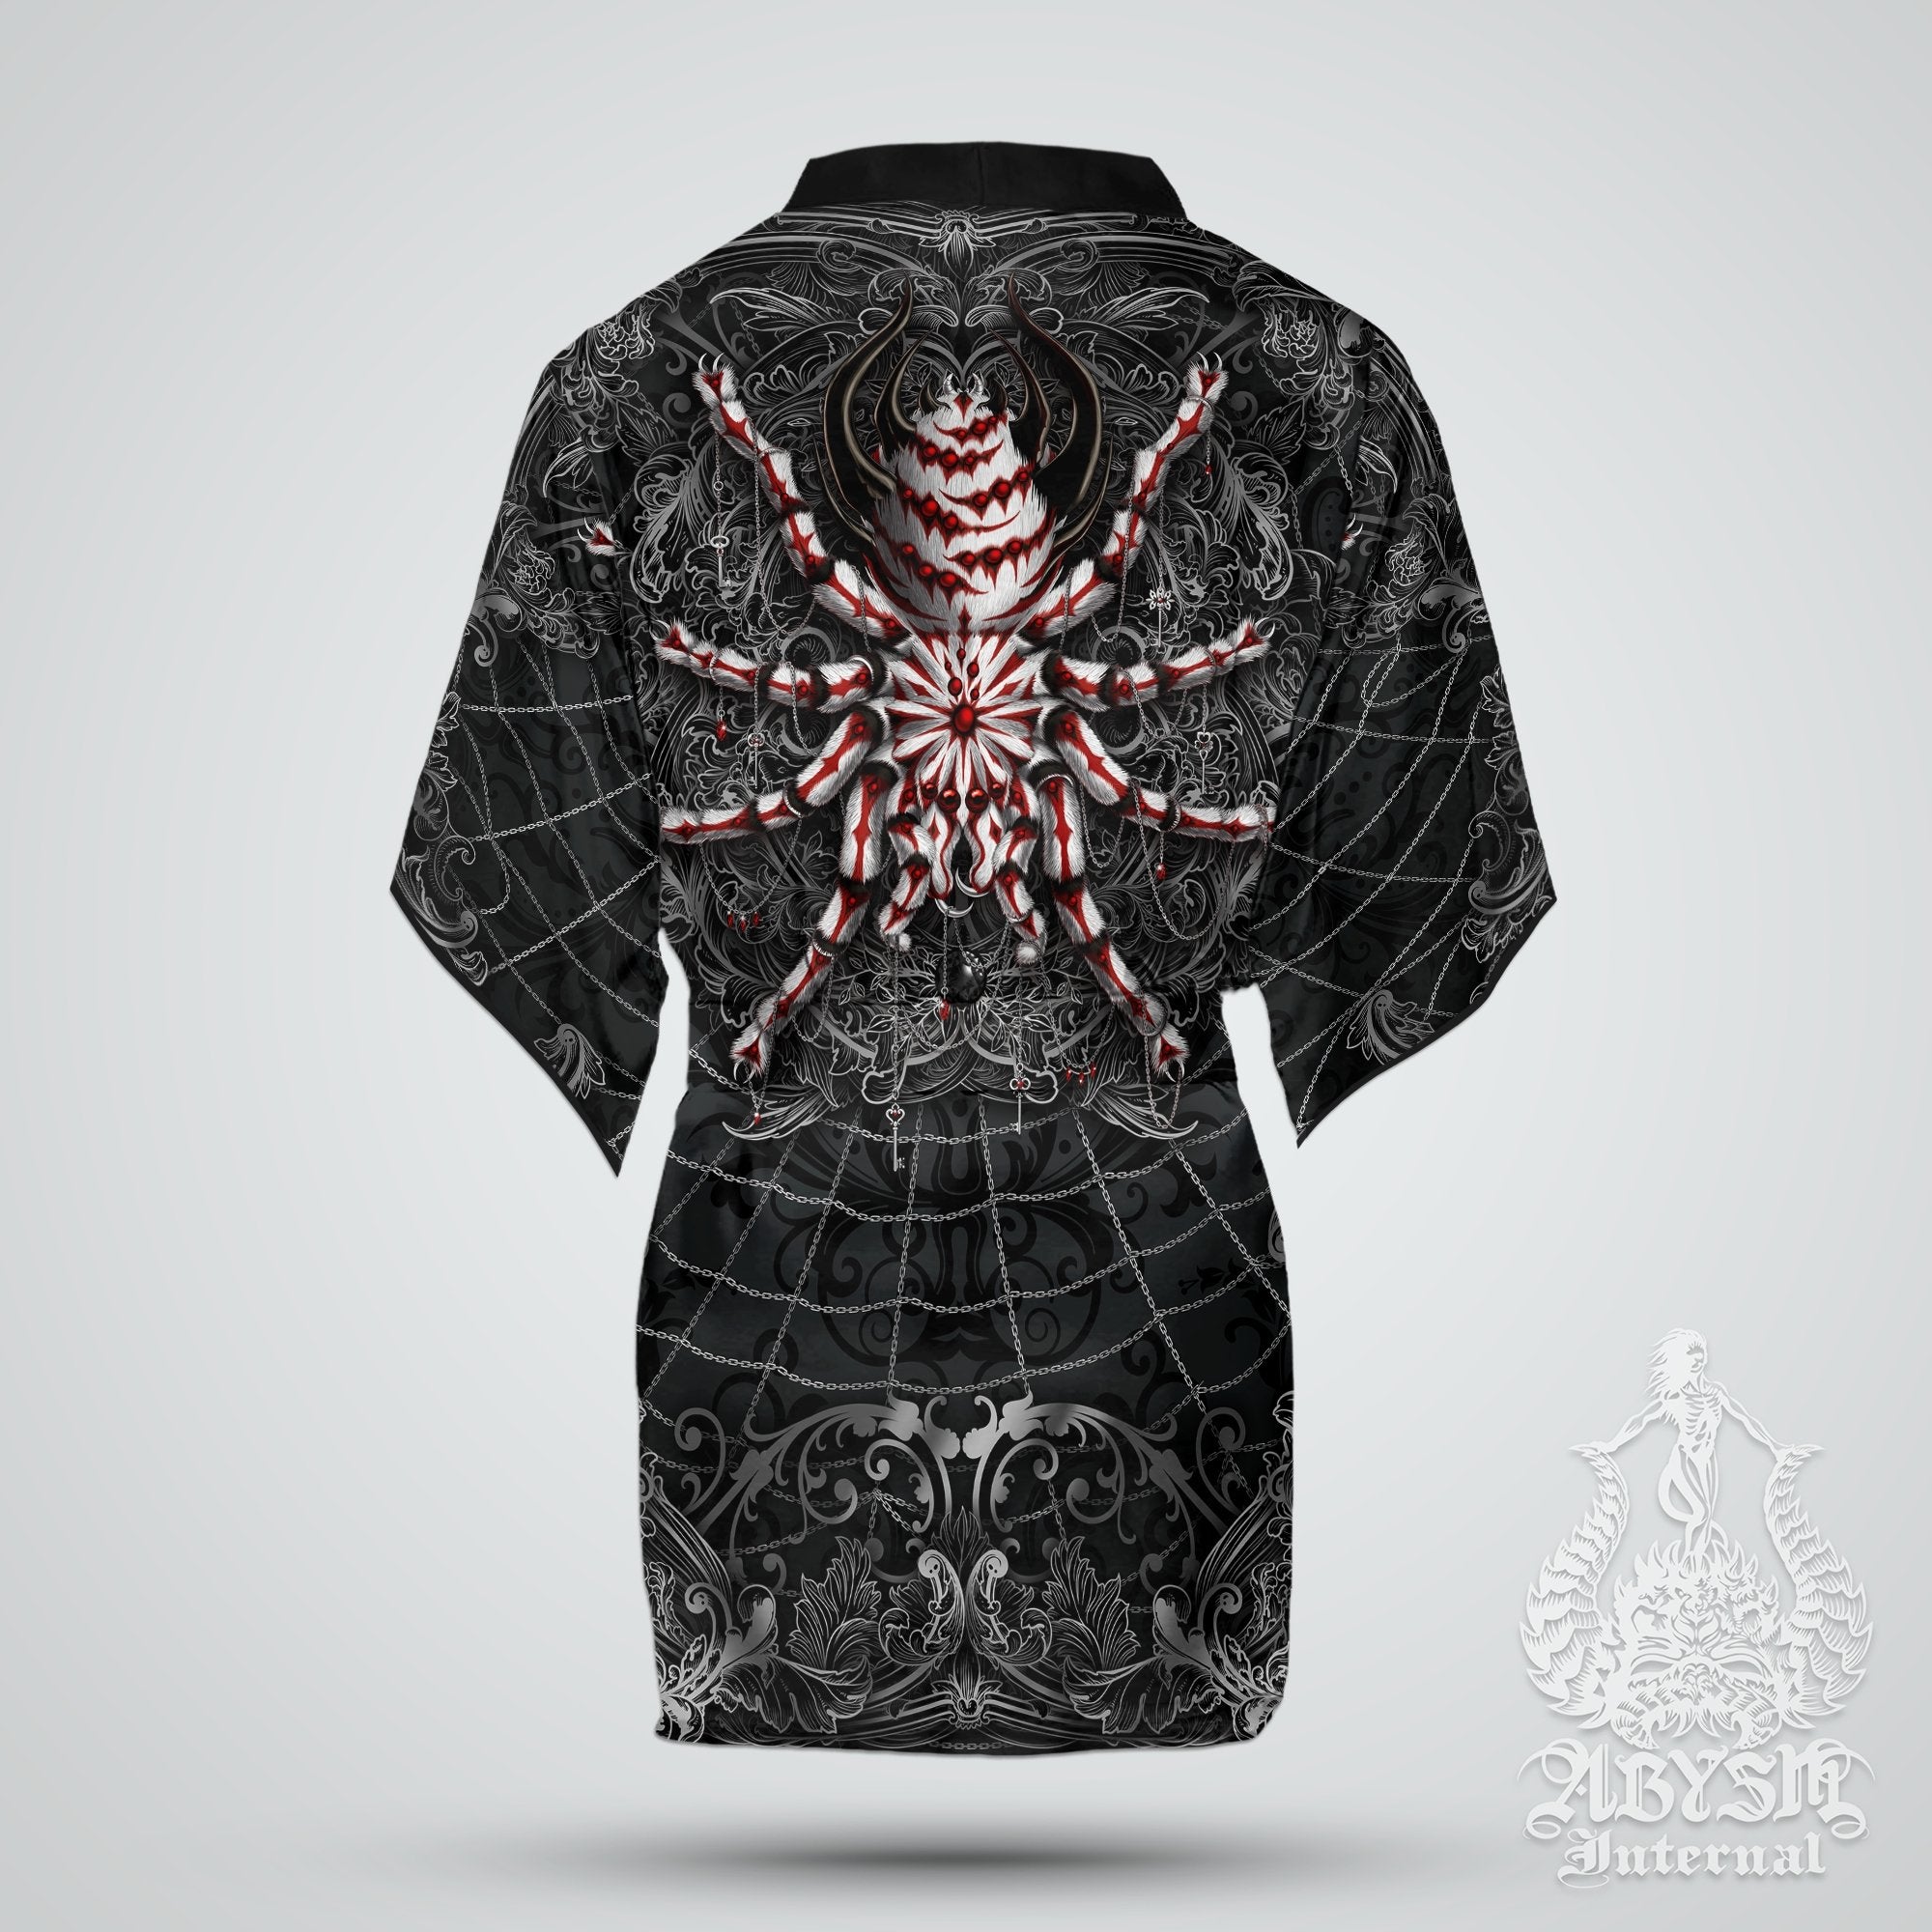 Spider Cover Up, Beach Outfit, Gothic Party Kimono, Summer Festival Robe, Indie and Alternative Clothing, Unisex - Tarantula, Dark - Abysm Internal